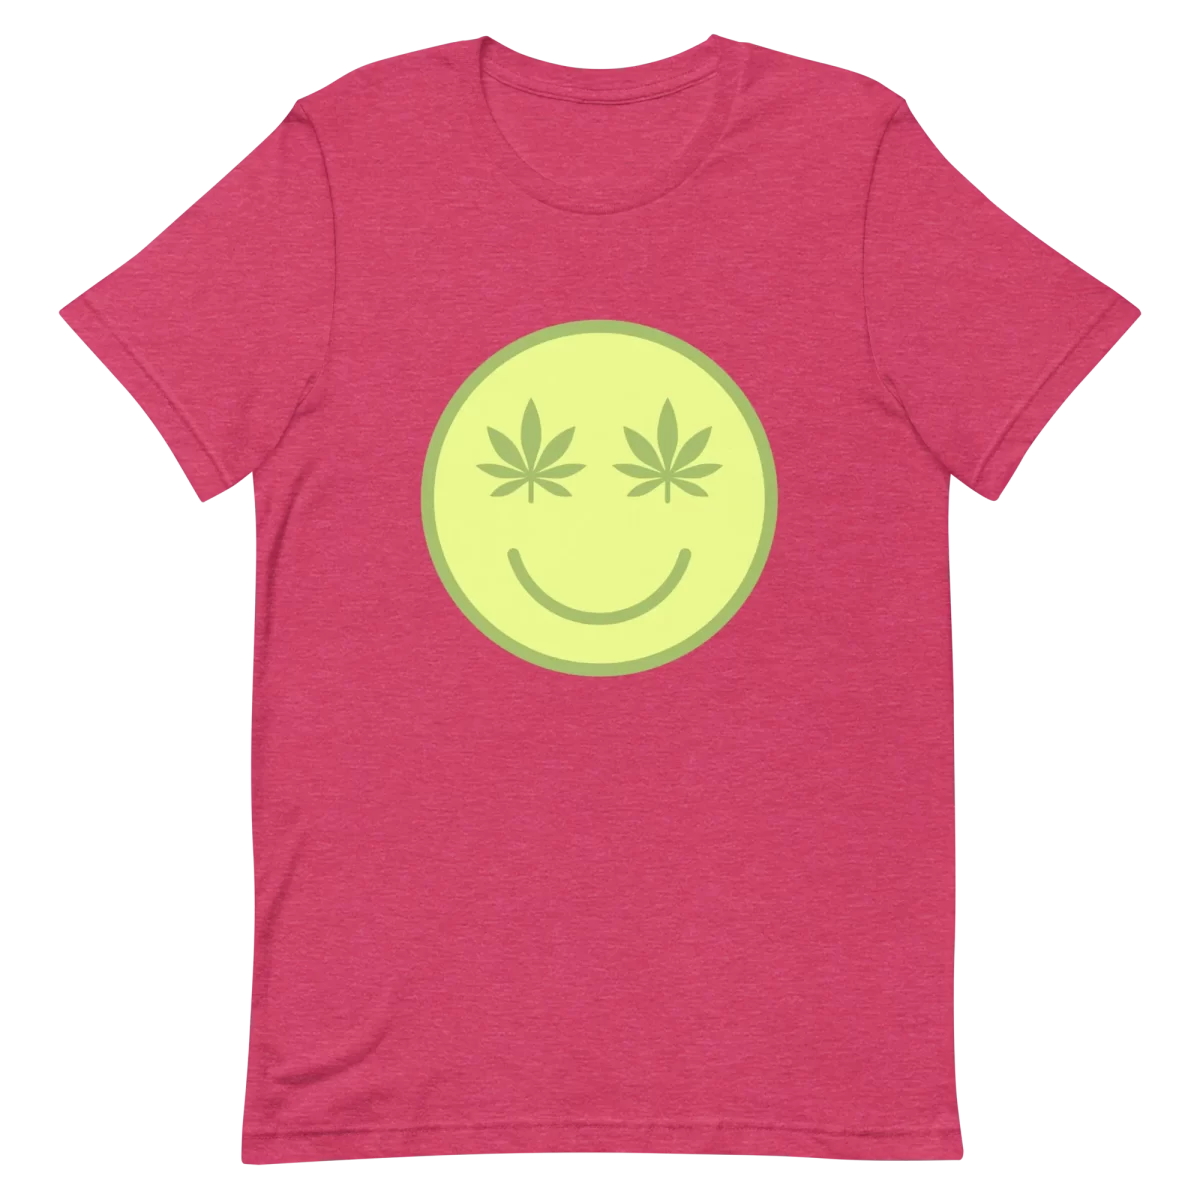 Unisex T-Shirt - Smiley Face with weed - Heather Raspberry